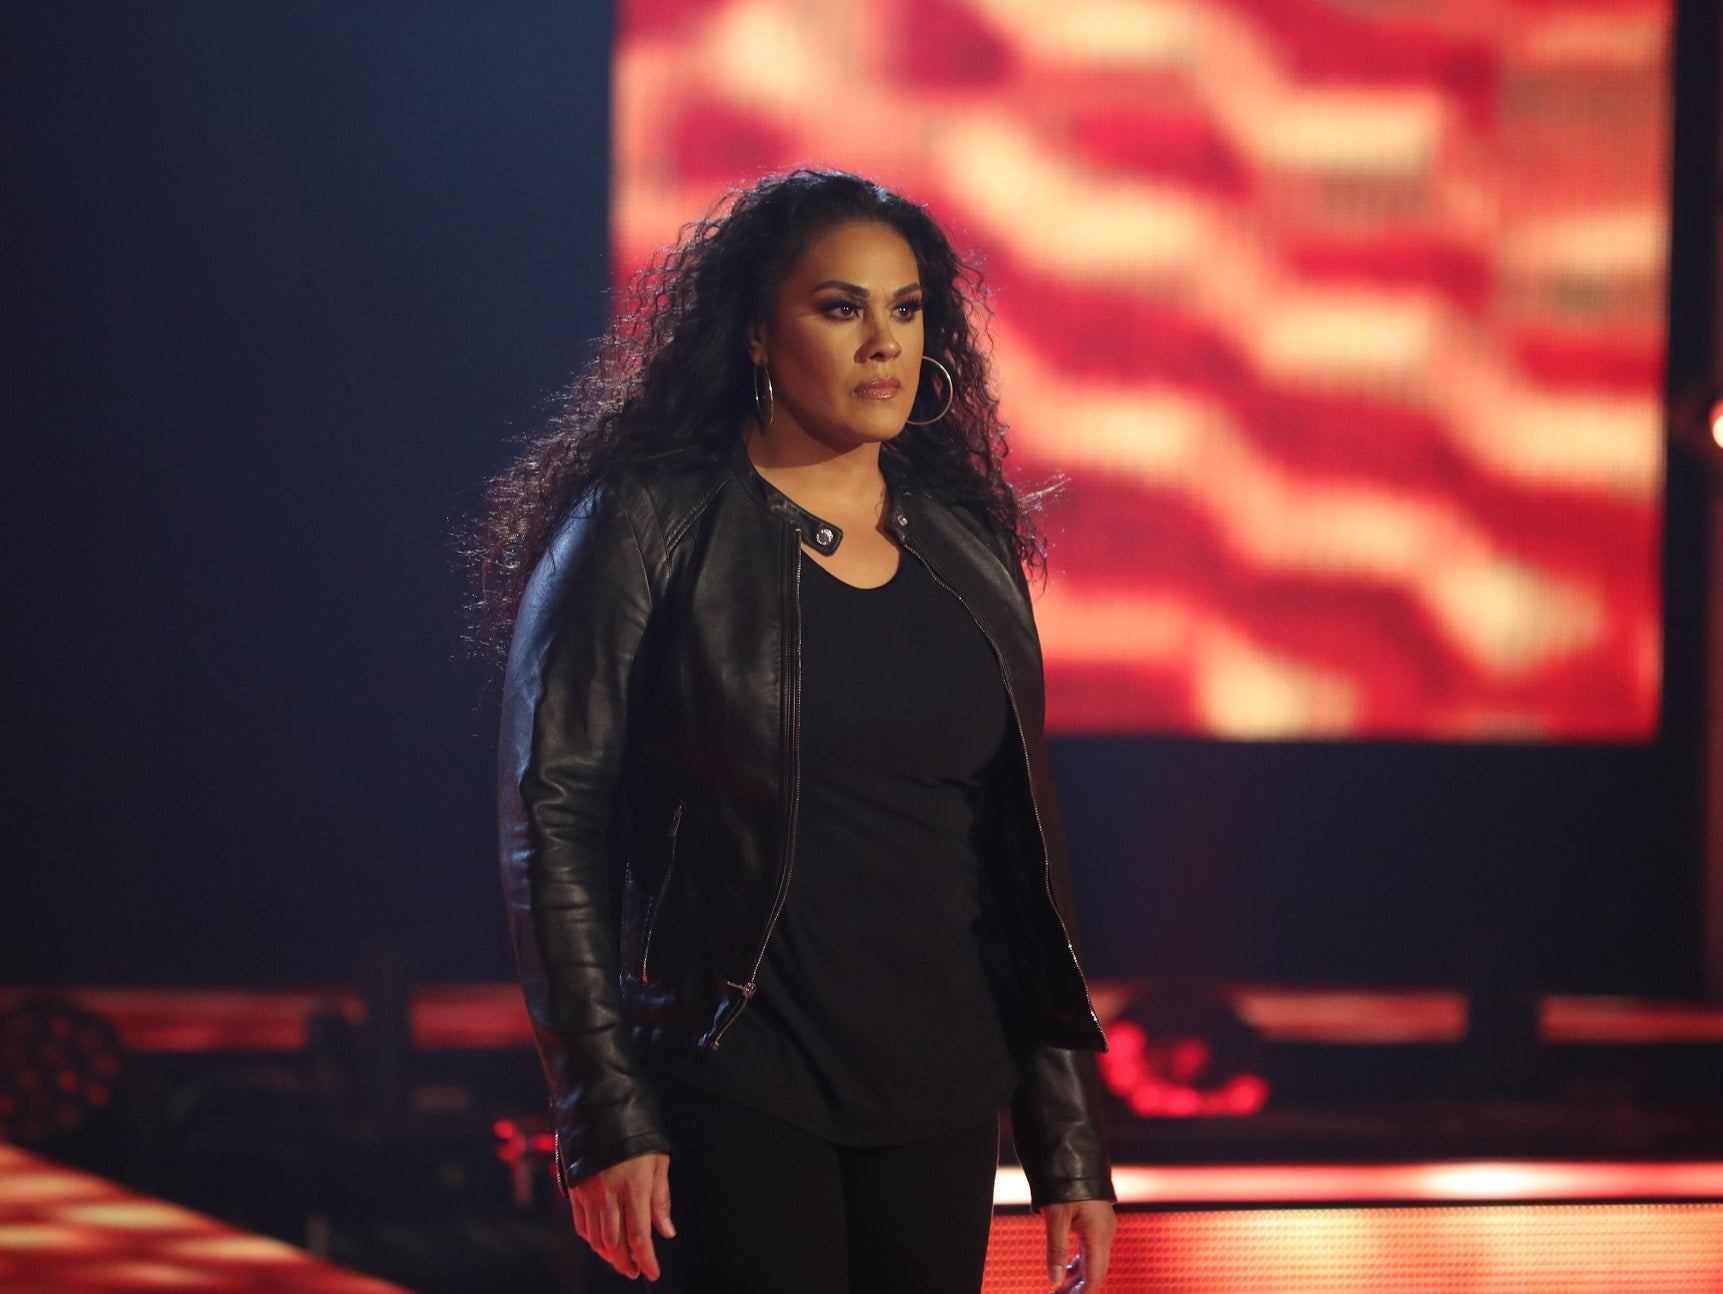 Tamina has wrestled in WWE since 2010